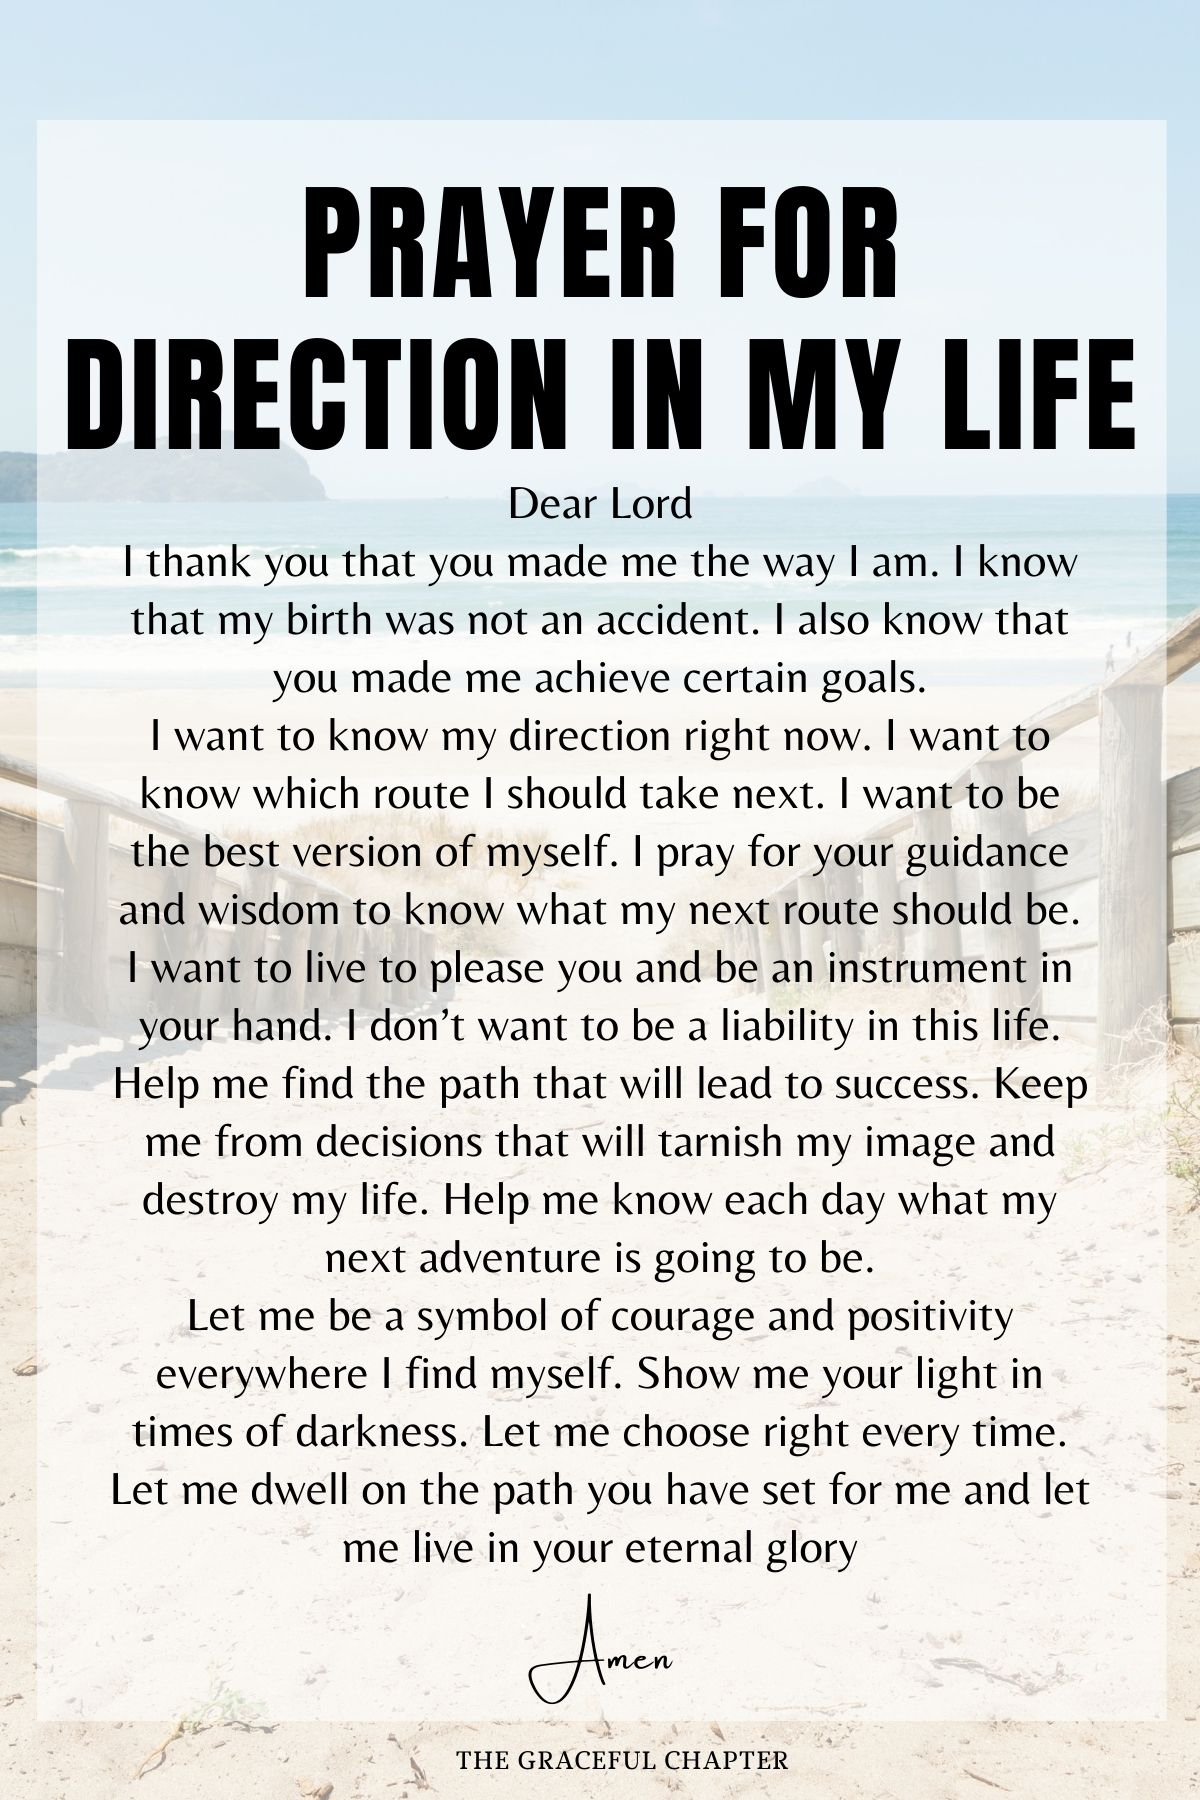 Prayer for Direction in my Life - prayers for purpose